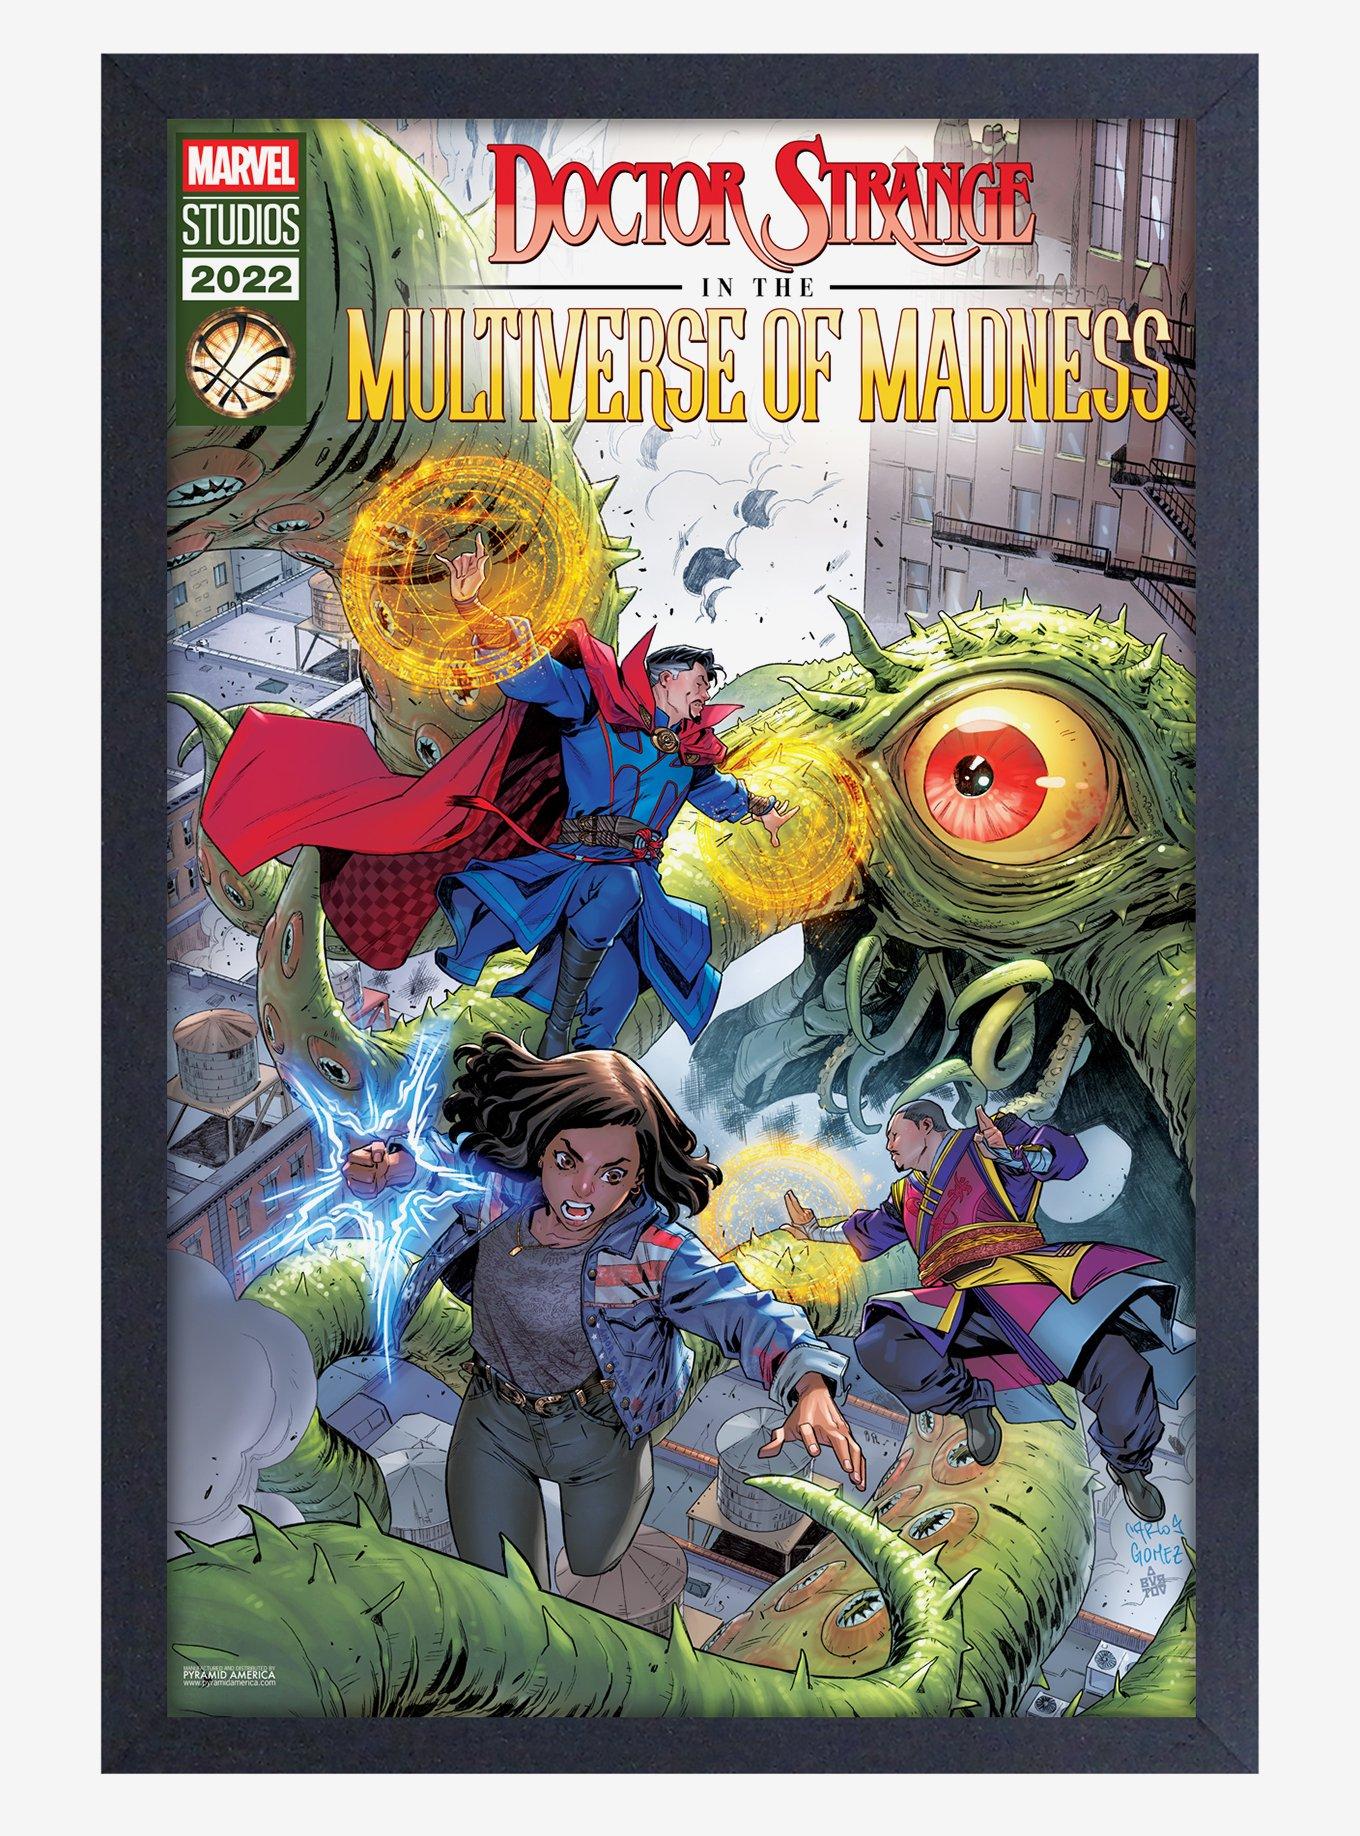 Painting in acrylic from a comic book frame : r/Marvel